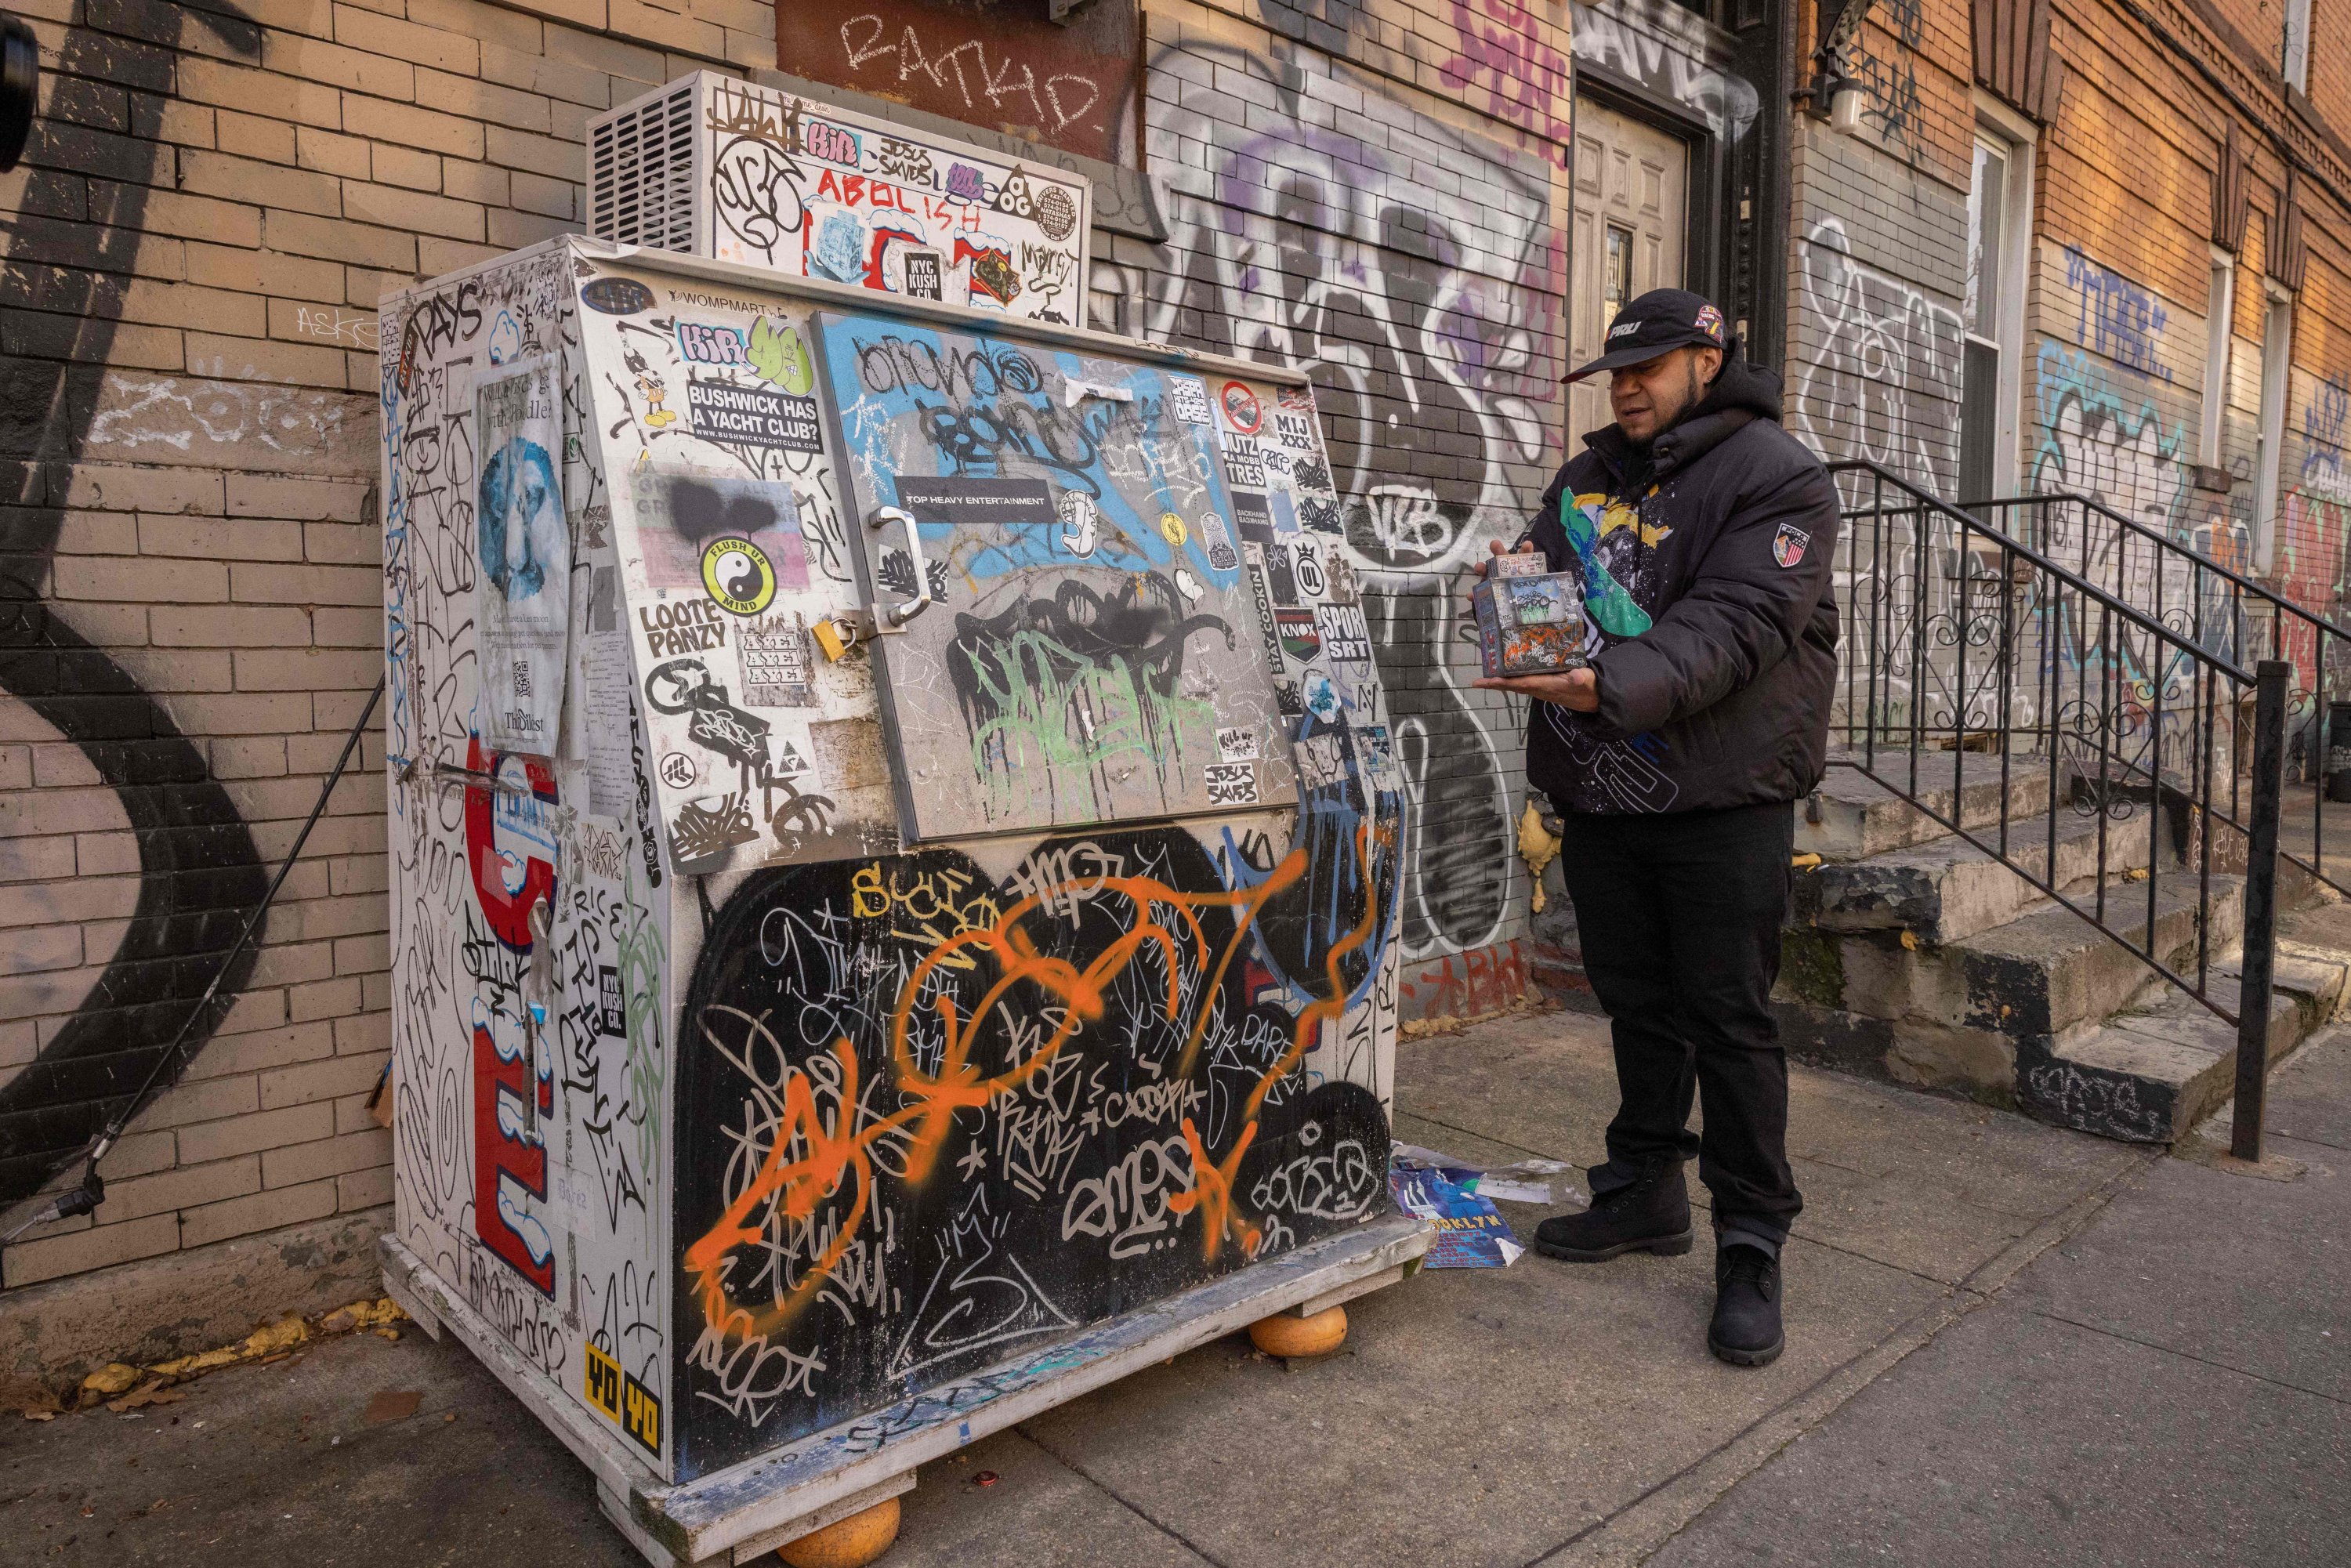 Danny Cortes, a street miniature artist, shows his miniature of an ice box in the Brooklyn borough of New York City, U.S., Dec. 19, 2022. (AFP Photo)